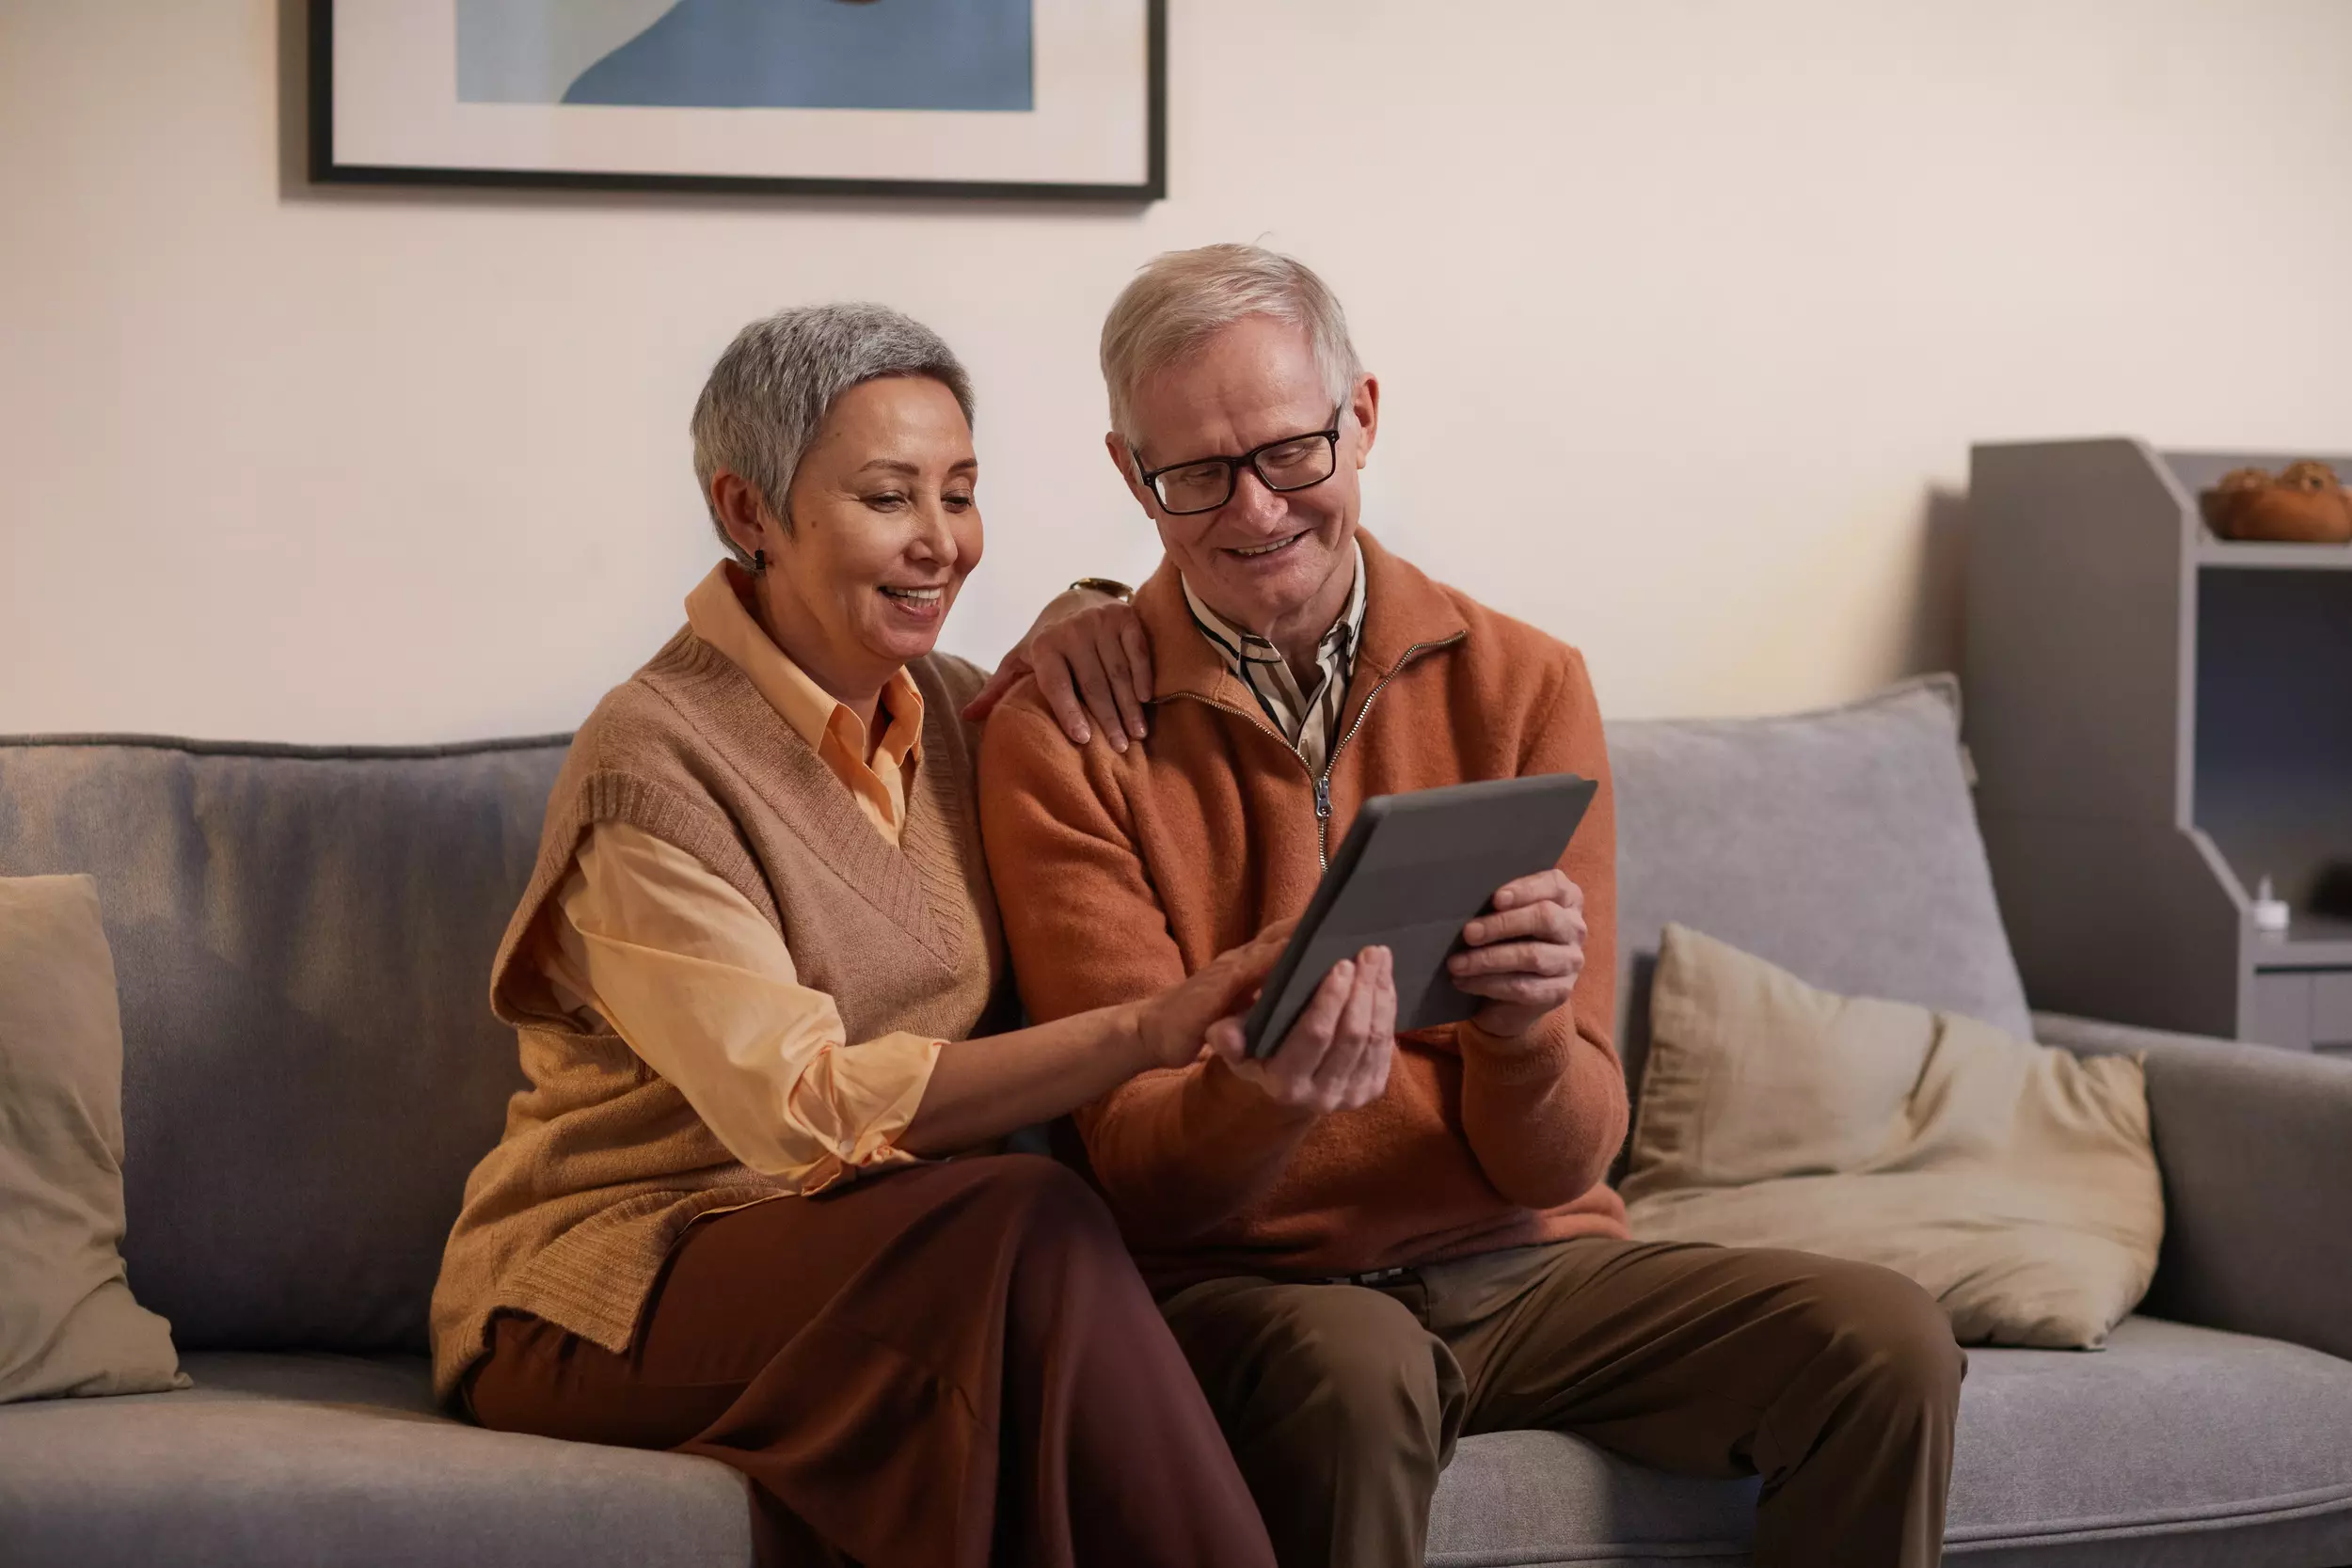 Man and woman sitting on a sofa while looking at a tablet computer